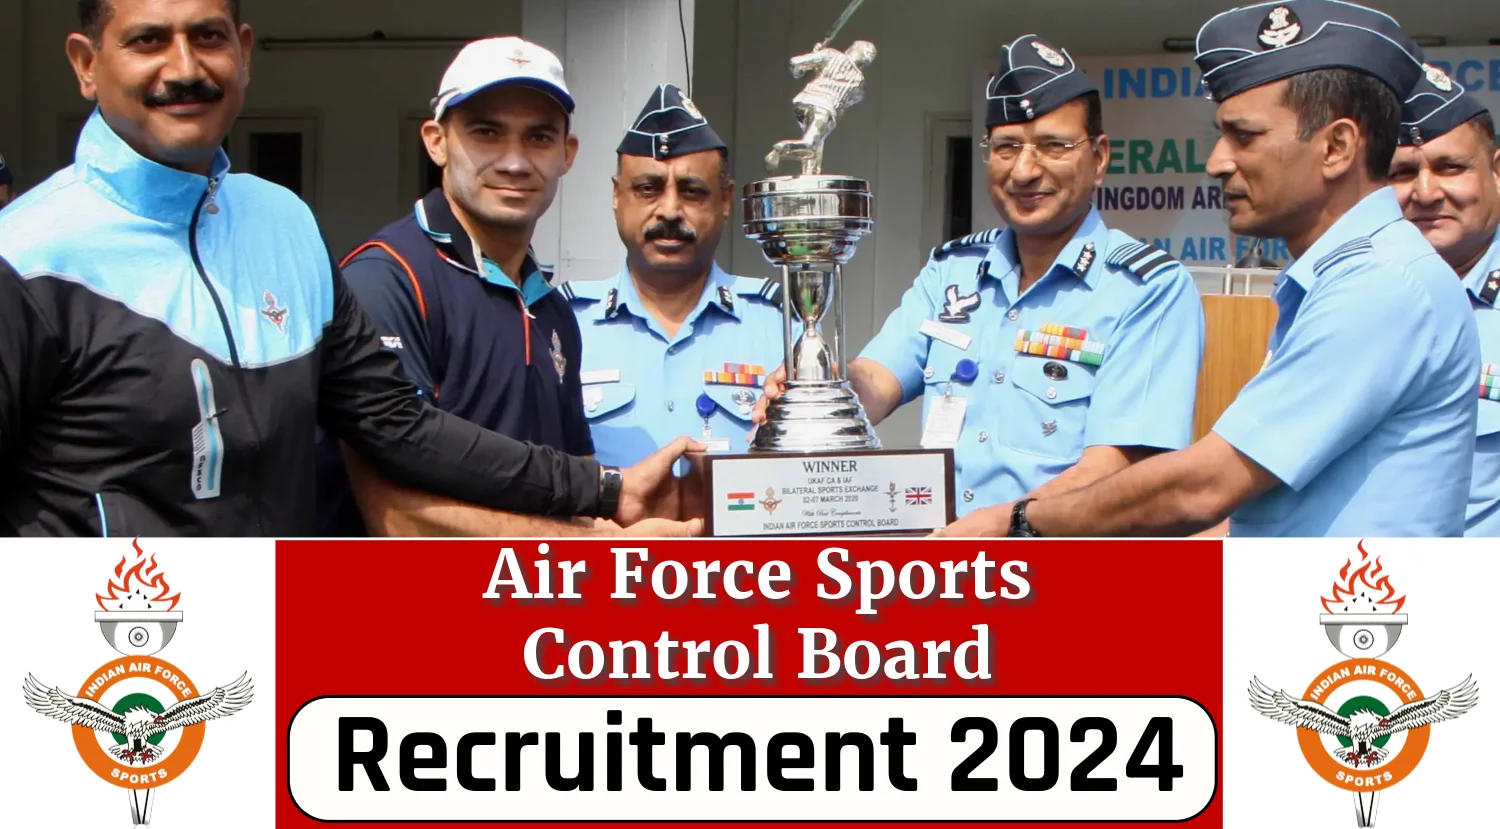 Air Force Recruitment 2024 Notification Out, Apply Under Various Vacancies under Air Force Sports Control Board Recruitment